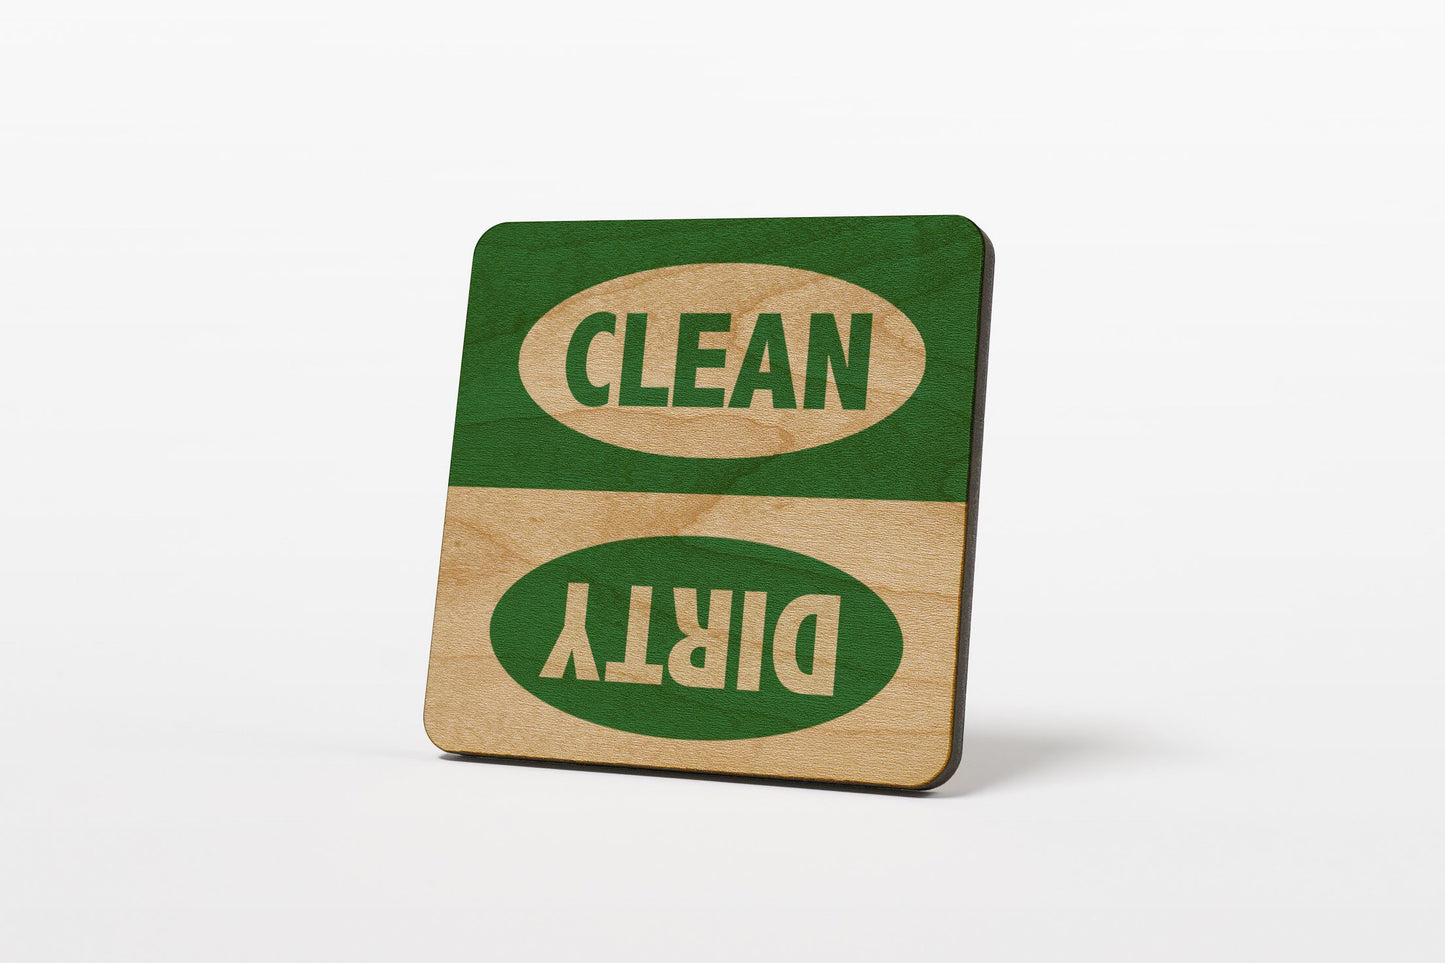 Green Dirty Clean Dishwasher Magnet